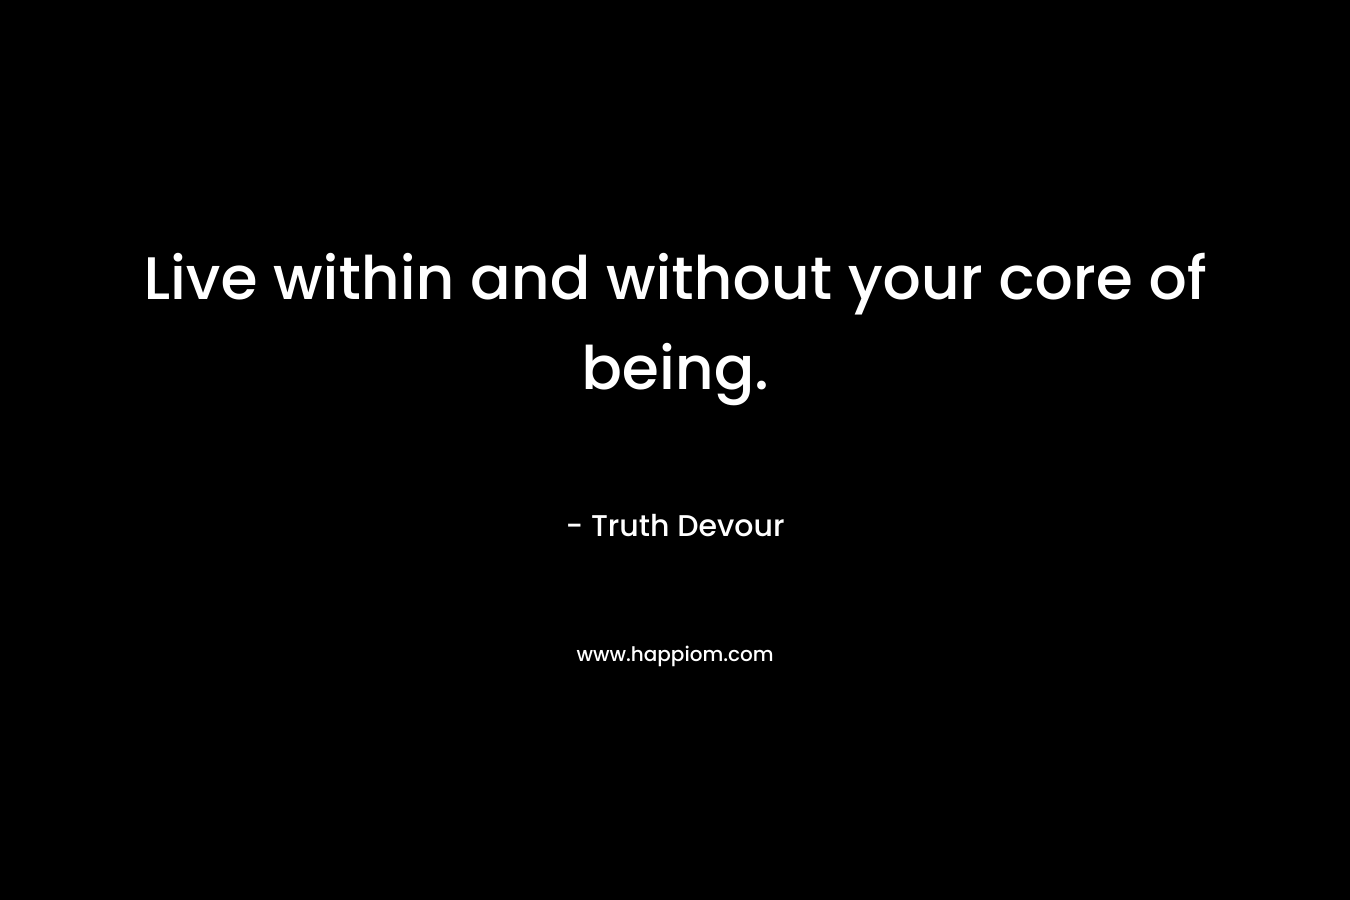 Live within and without your core of being.